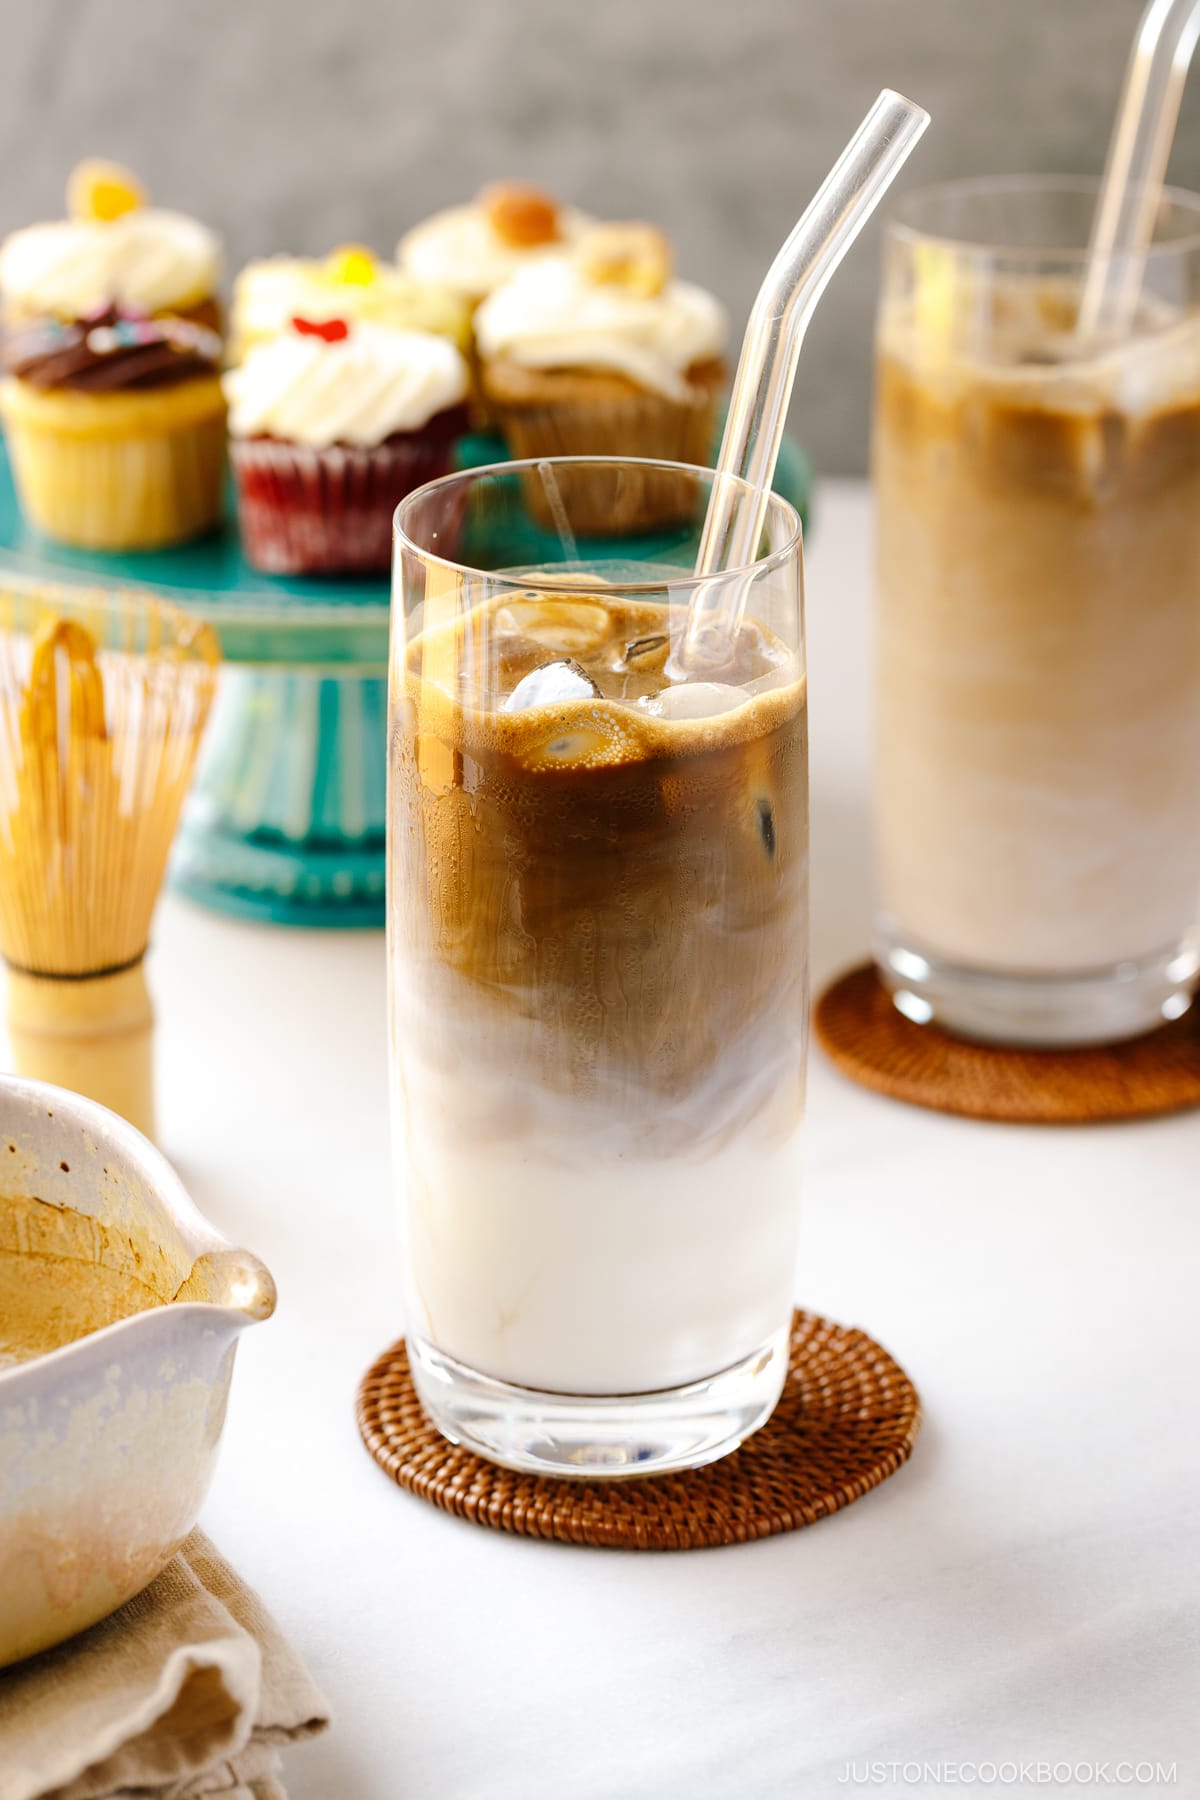 A tall glass filled with iced hojicha latte, showing two layers of milk and chocolate-color roasted green tea (hojicha).